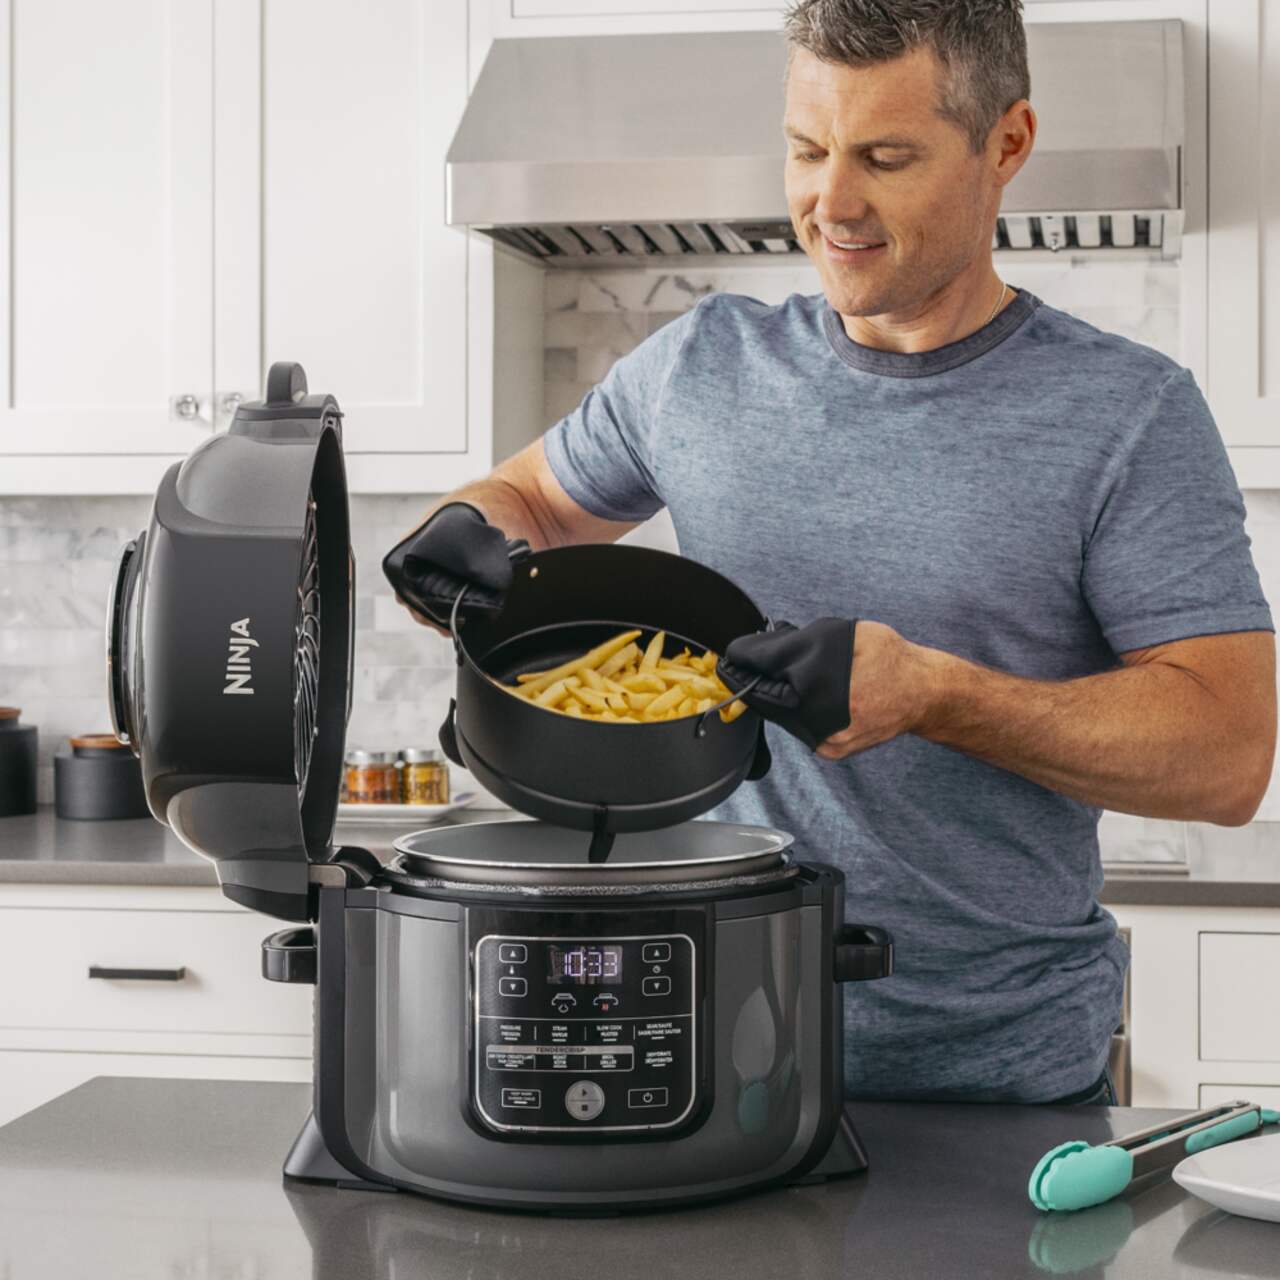 https://media-www.canadiantire.ca/product/living/kitchen/kitchen-appliances/0439570/ninja-foodie-726d017a-7c4a-4d0c-95c1-05145ac9527f.png?imdensity=1&imwidth=1244&impolicy=mZoom